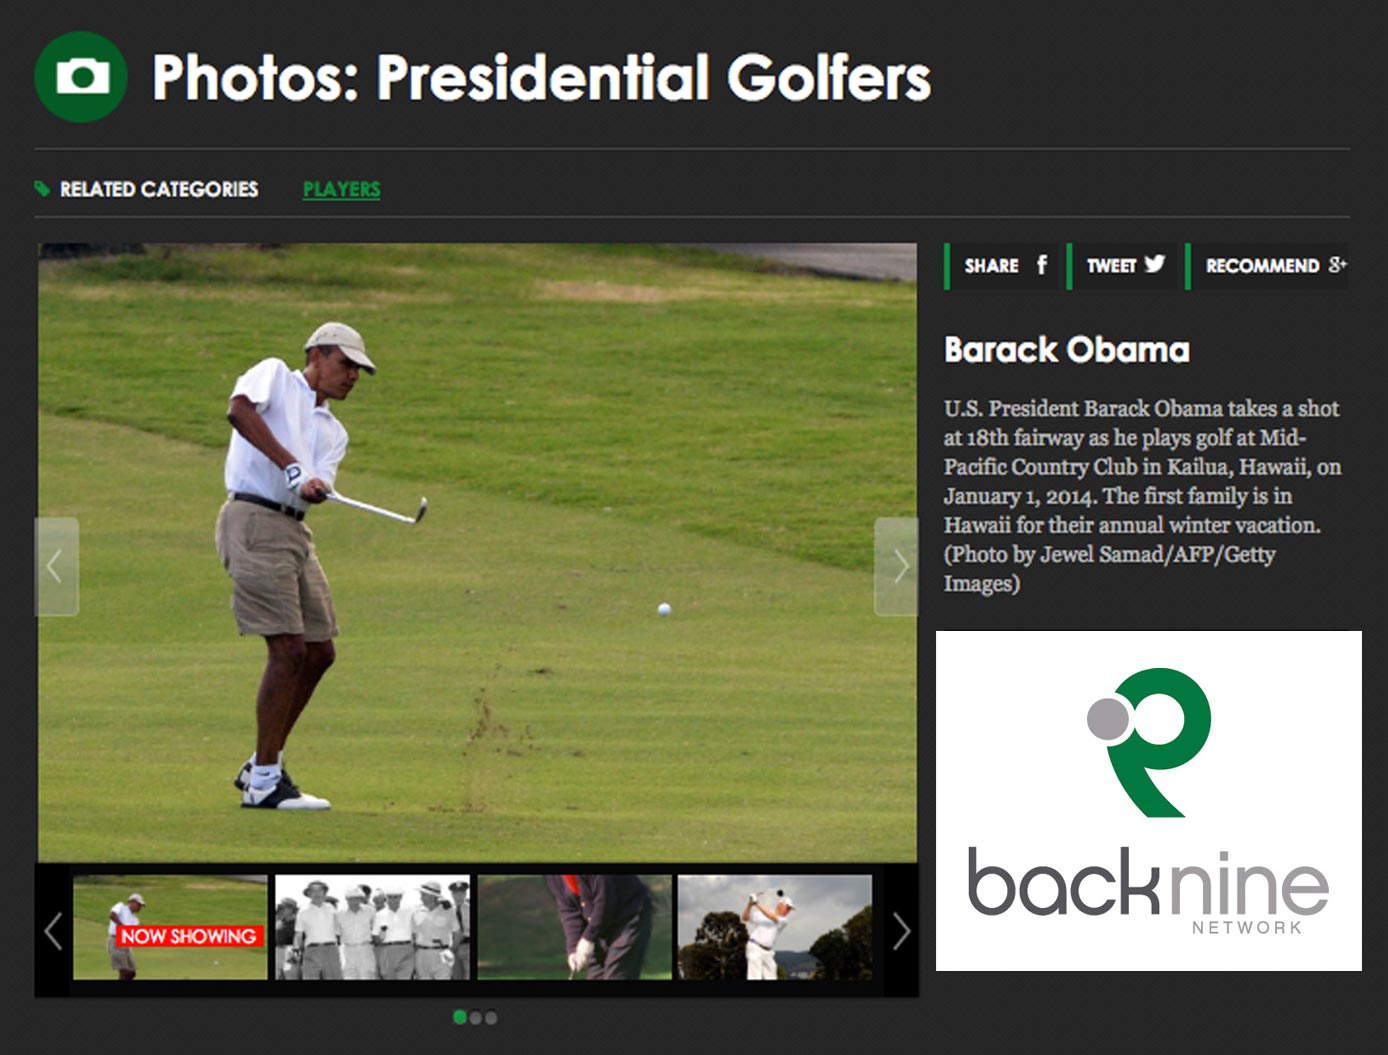 PhotoGallery_PresidentialGolfers_Article